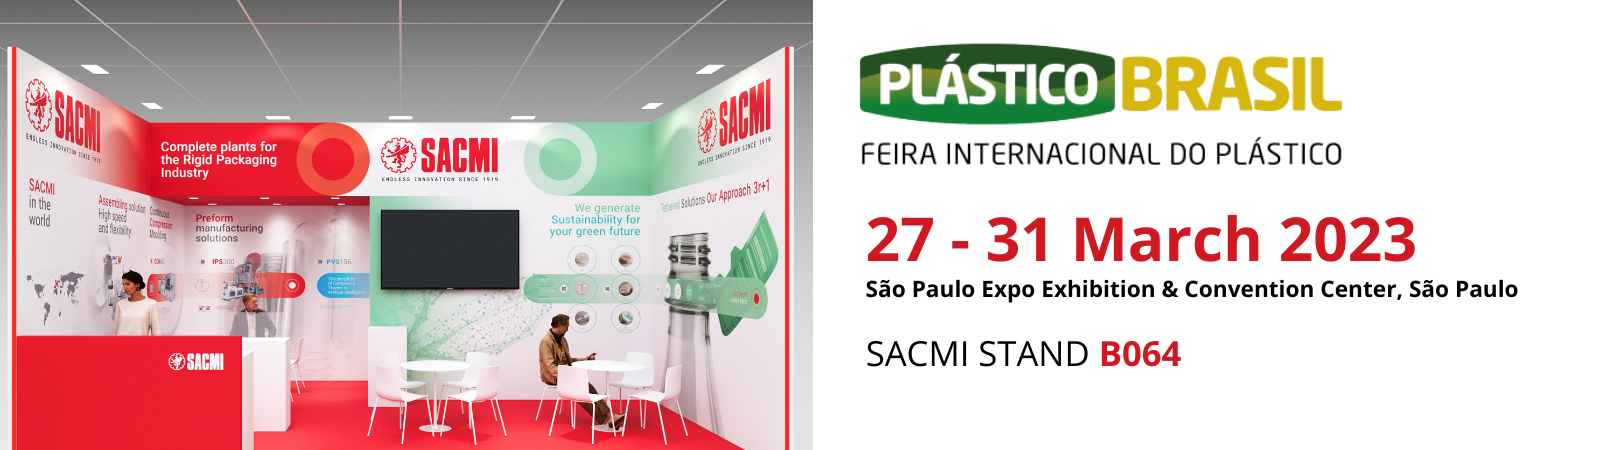 SACMI at Plastico do Brasil (Sao Paulo Expo, 27-31 March 2023): the advantages of a sole partner 